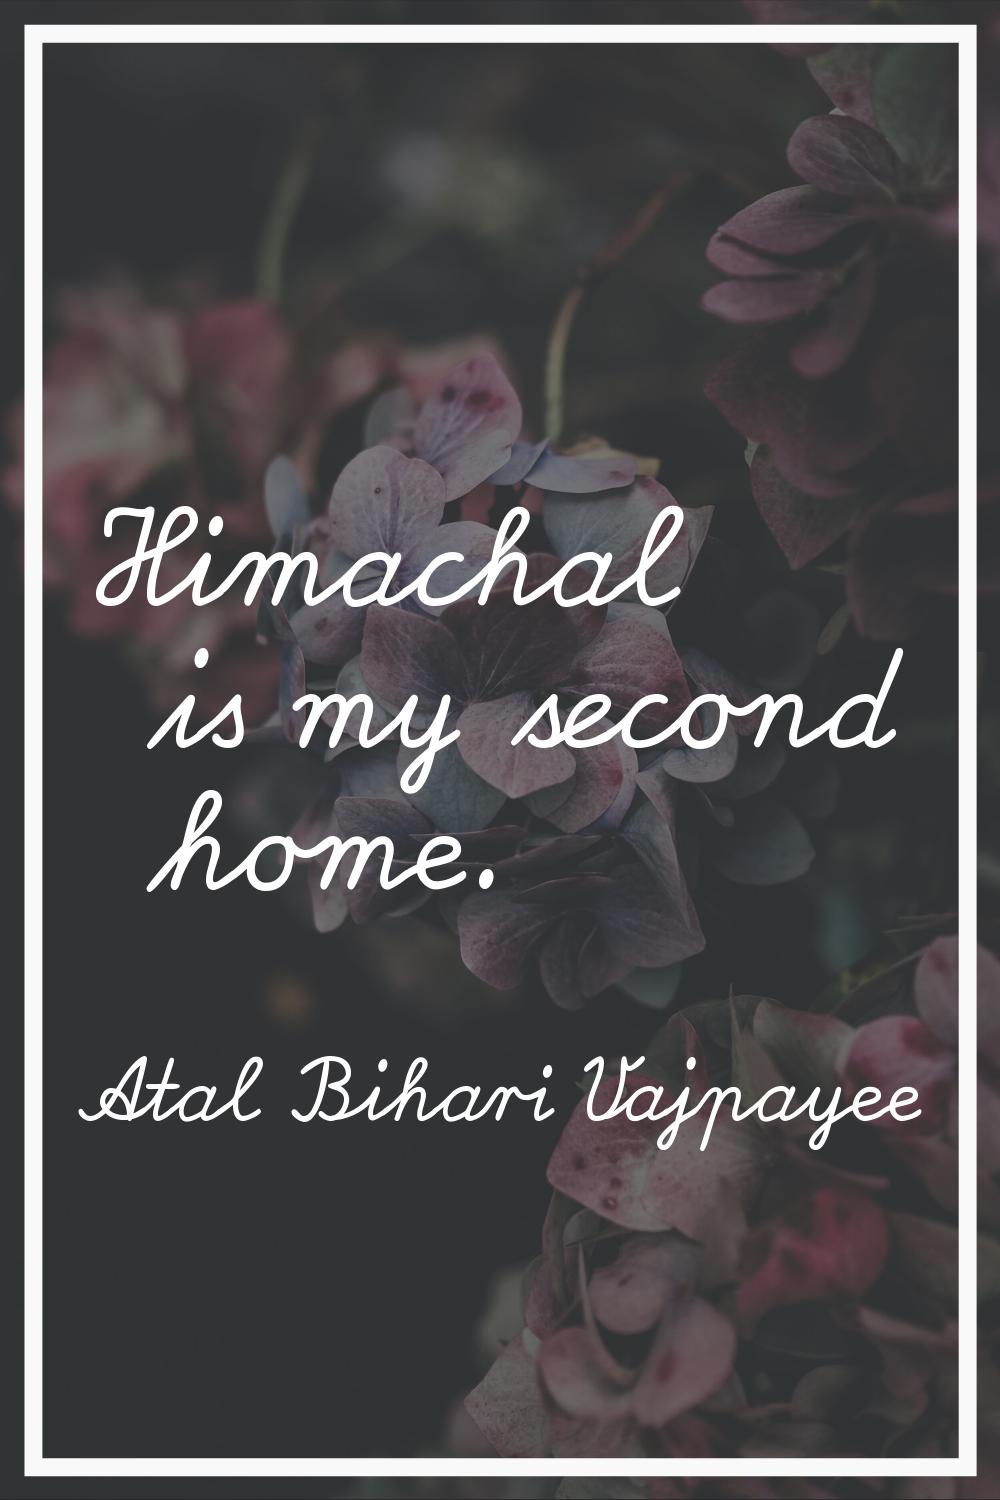 Himachal is my second home.